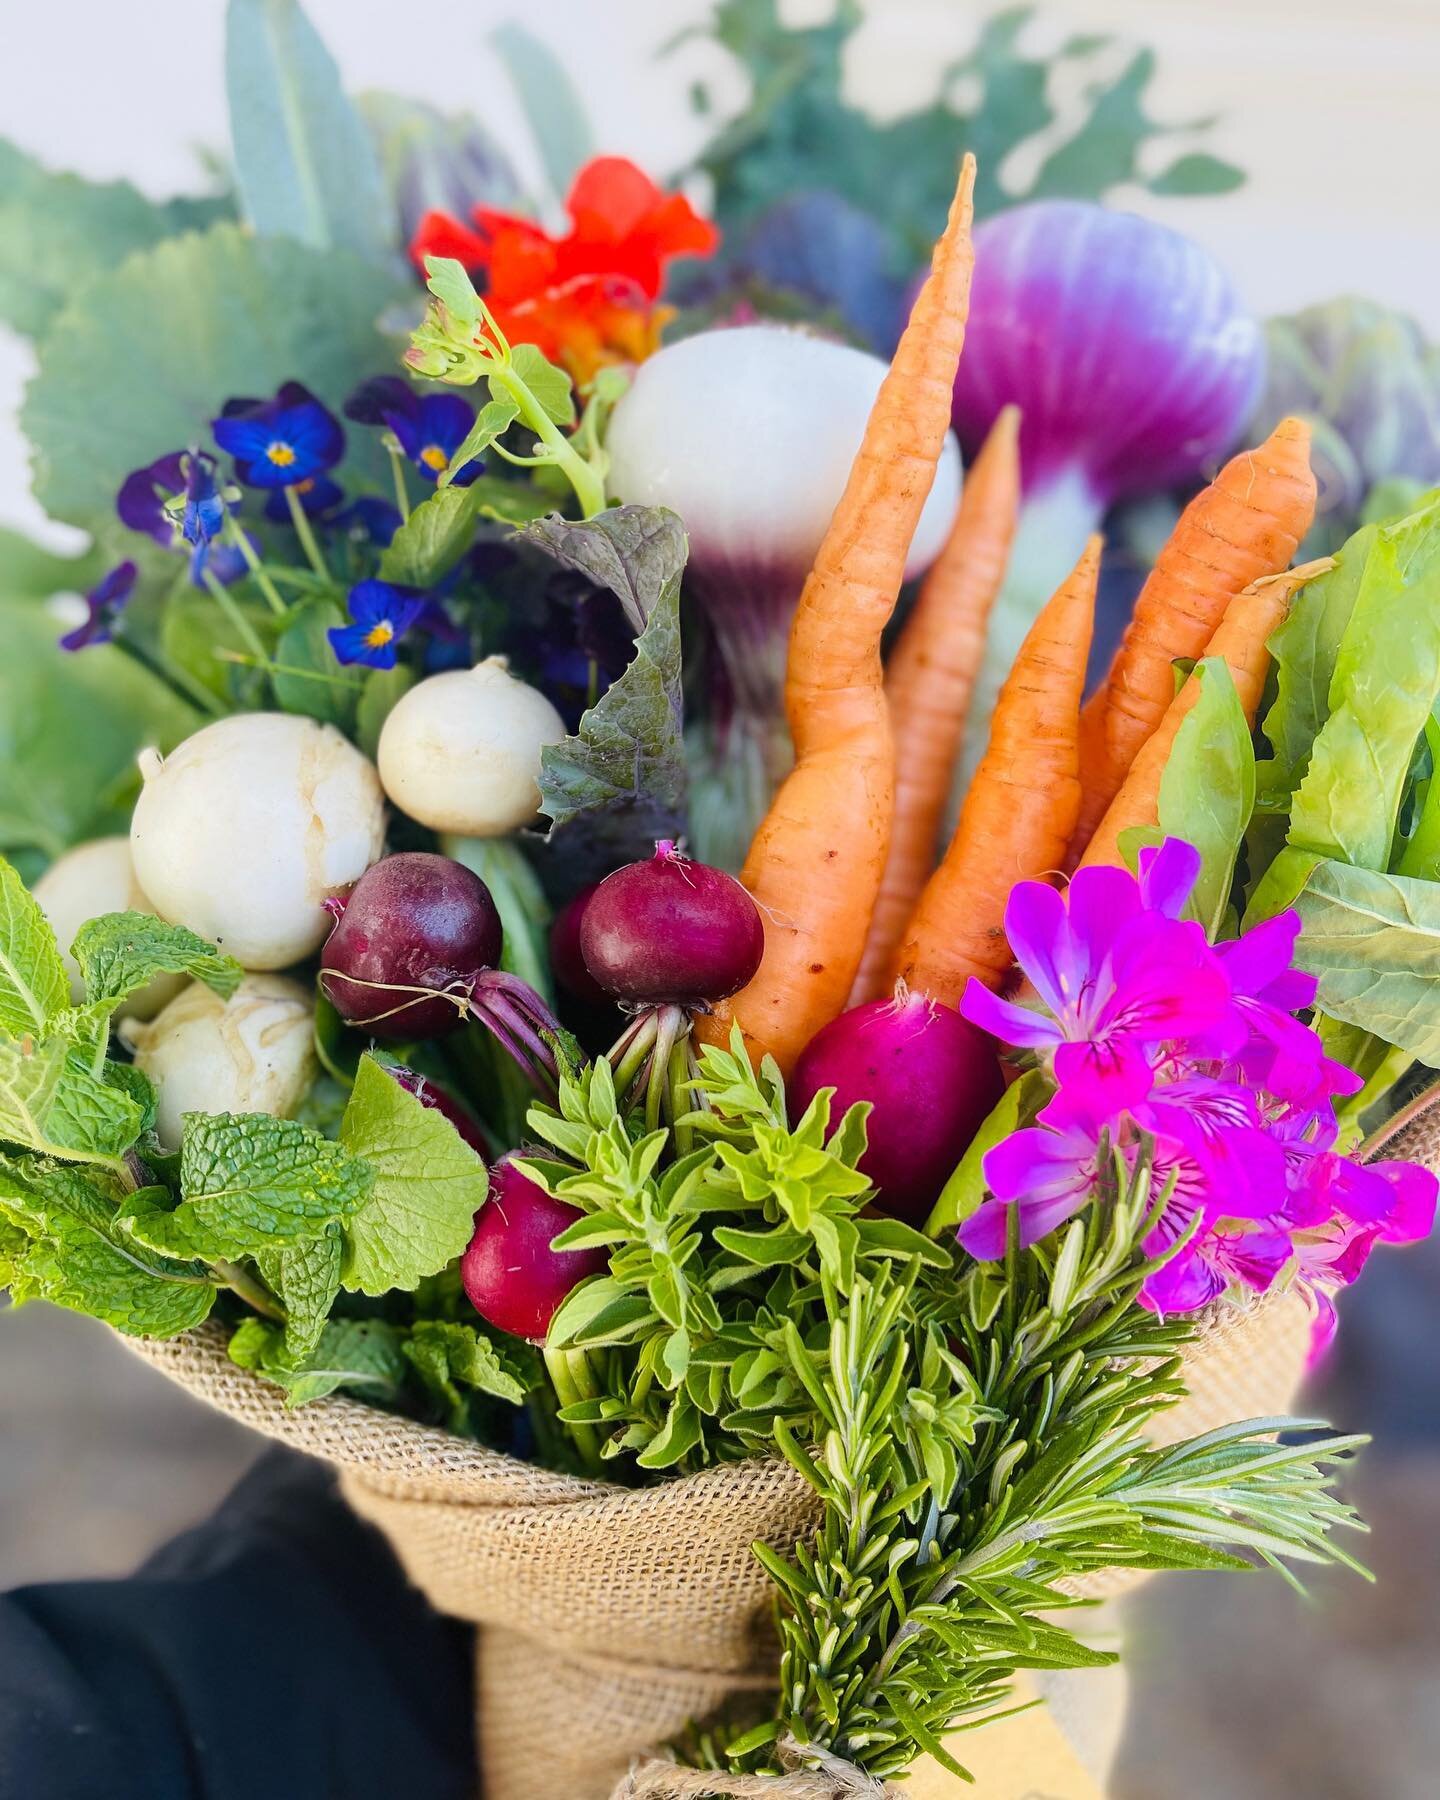 Winter Garden and Market Bouquets are live! Give a gift to yourself or someone else this holiday season.
⠀⠀⠀⠀⠀⠀⠀⠀⠀
Each Bouquet includes fresh seasonal organic produce from our gardens and local farms, beautifully wrapped with intention and personall